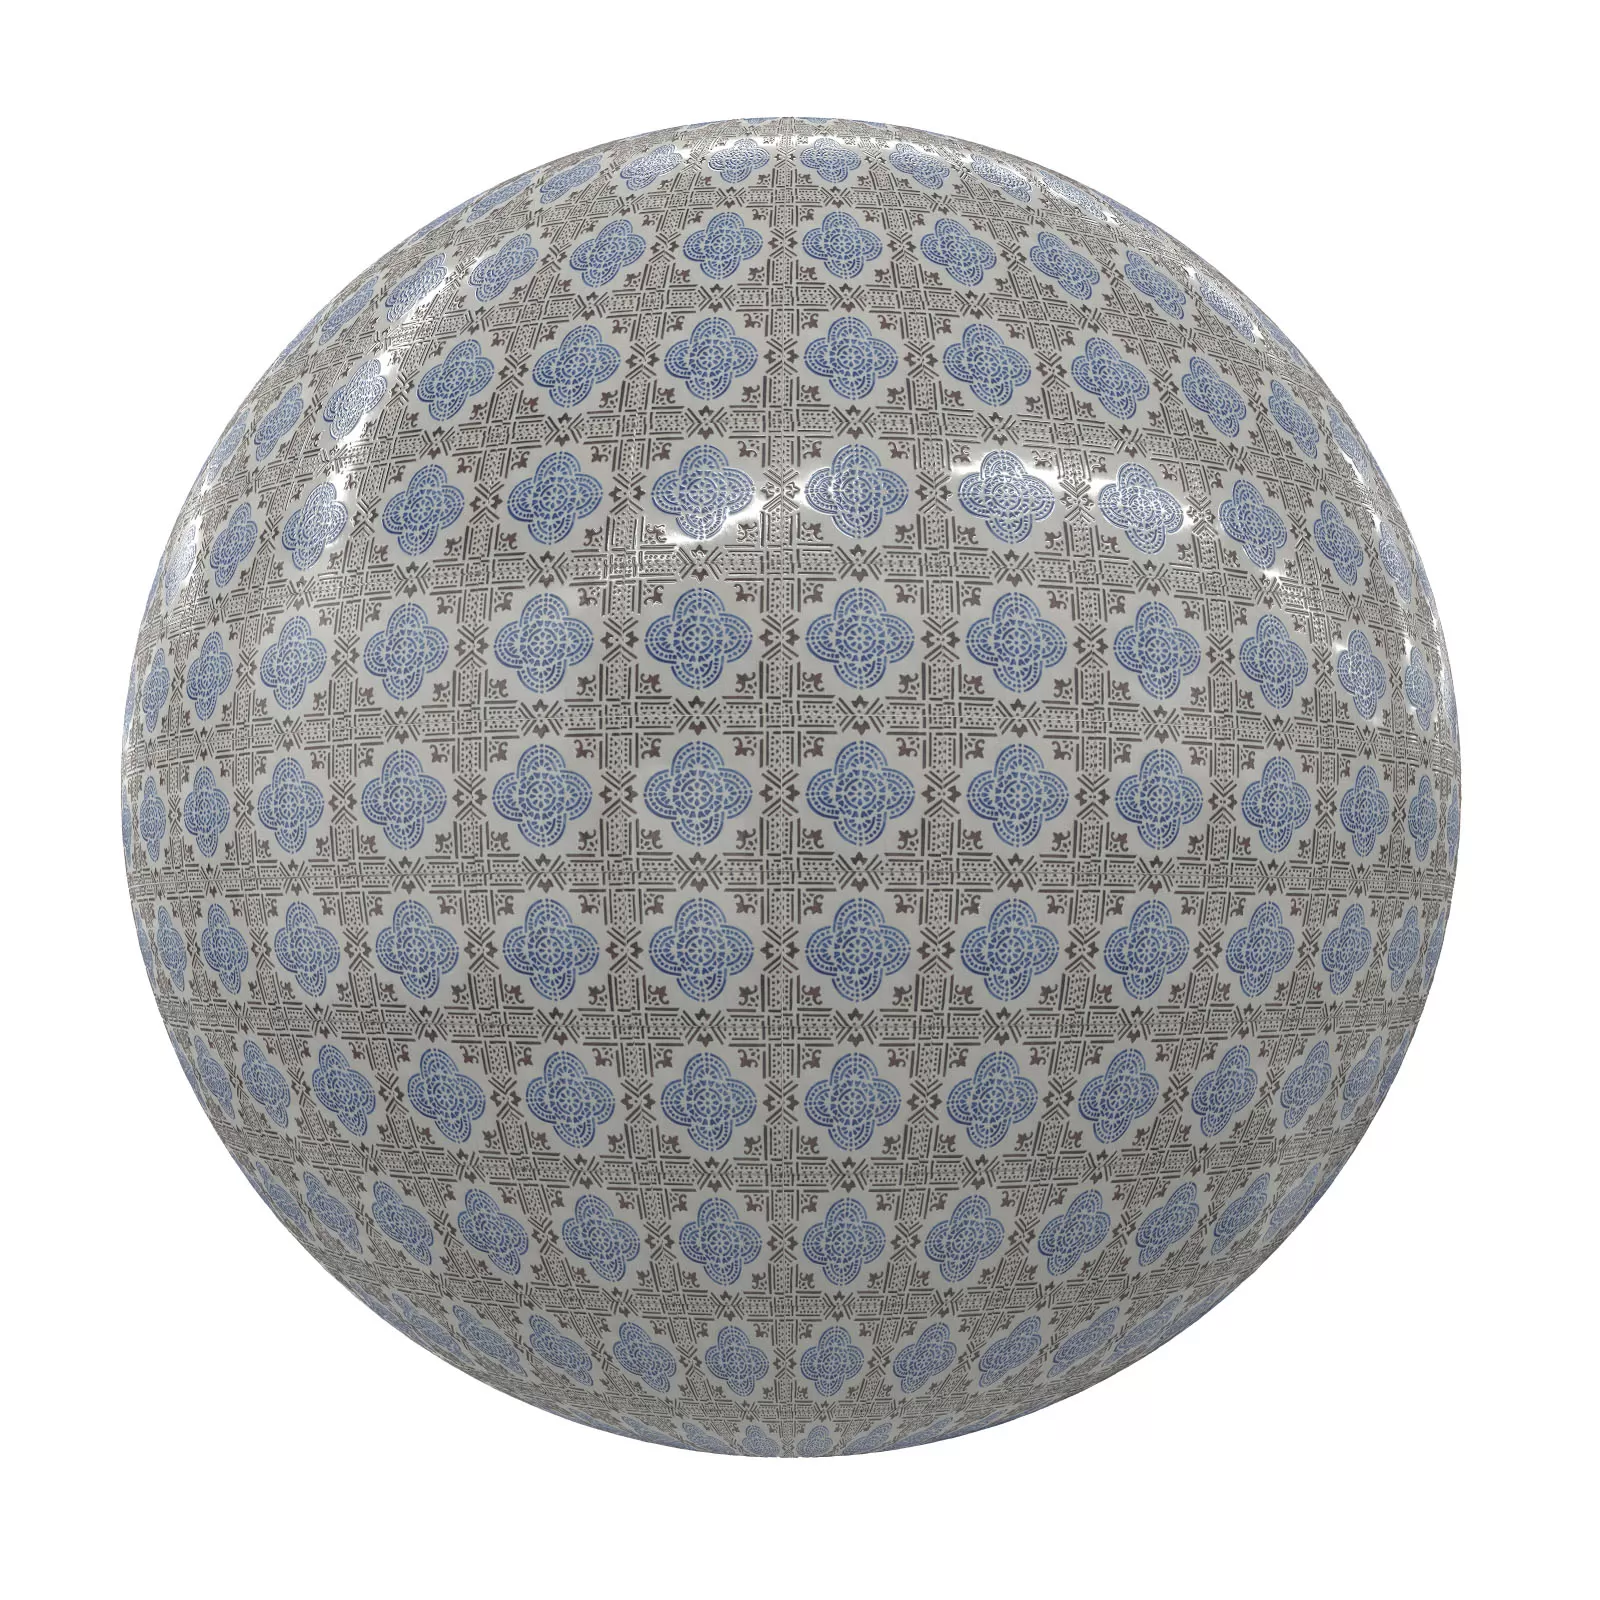 PBR CGAXIS TEXTURES – TILES – Patterned Tiles 10